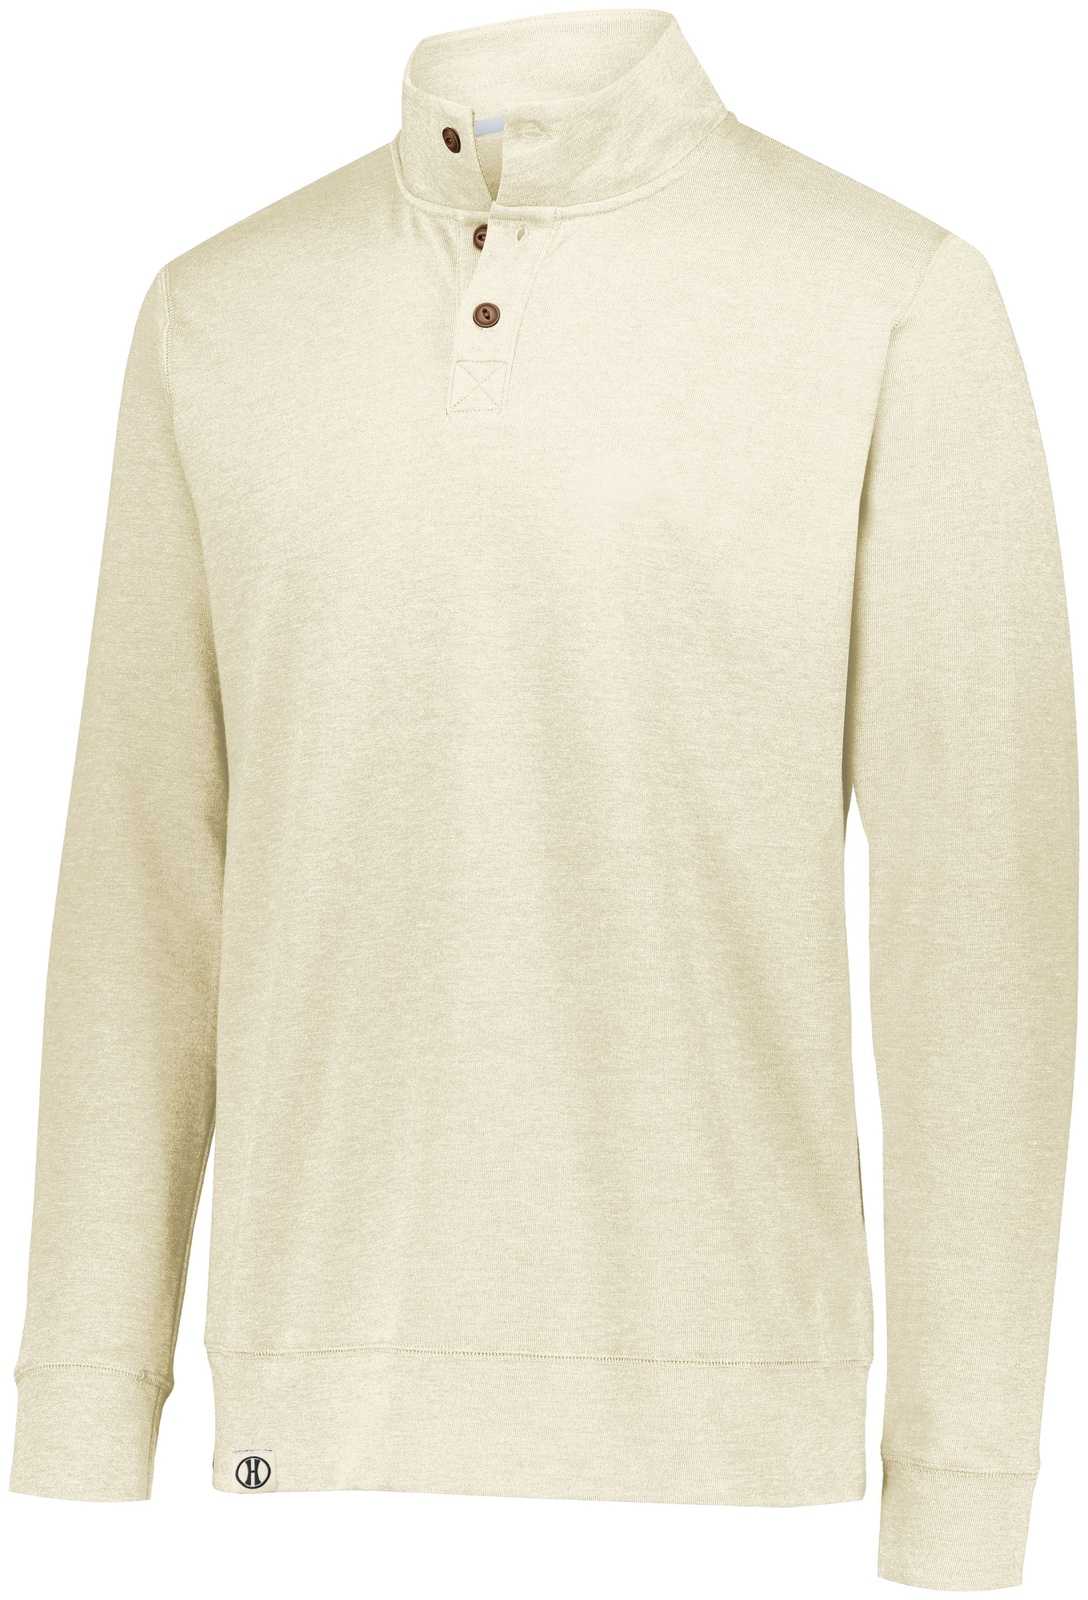 Holloway 229575 Sophomore Pullover - Vintage Birch Heather - HIT a Double